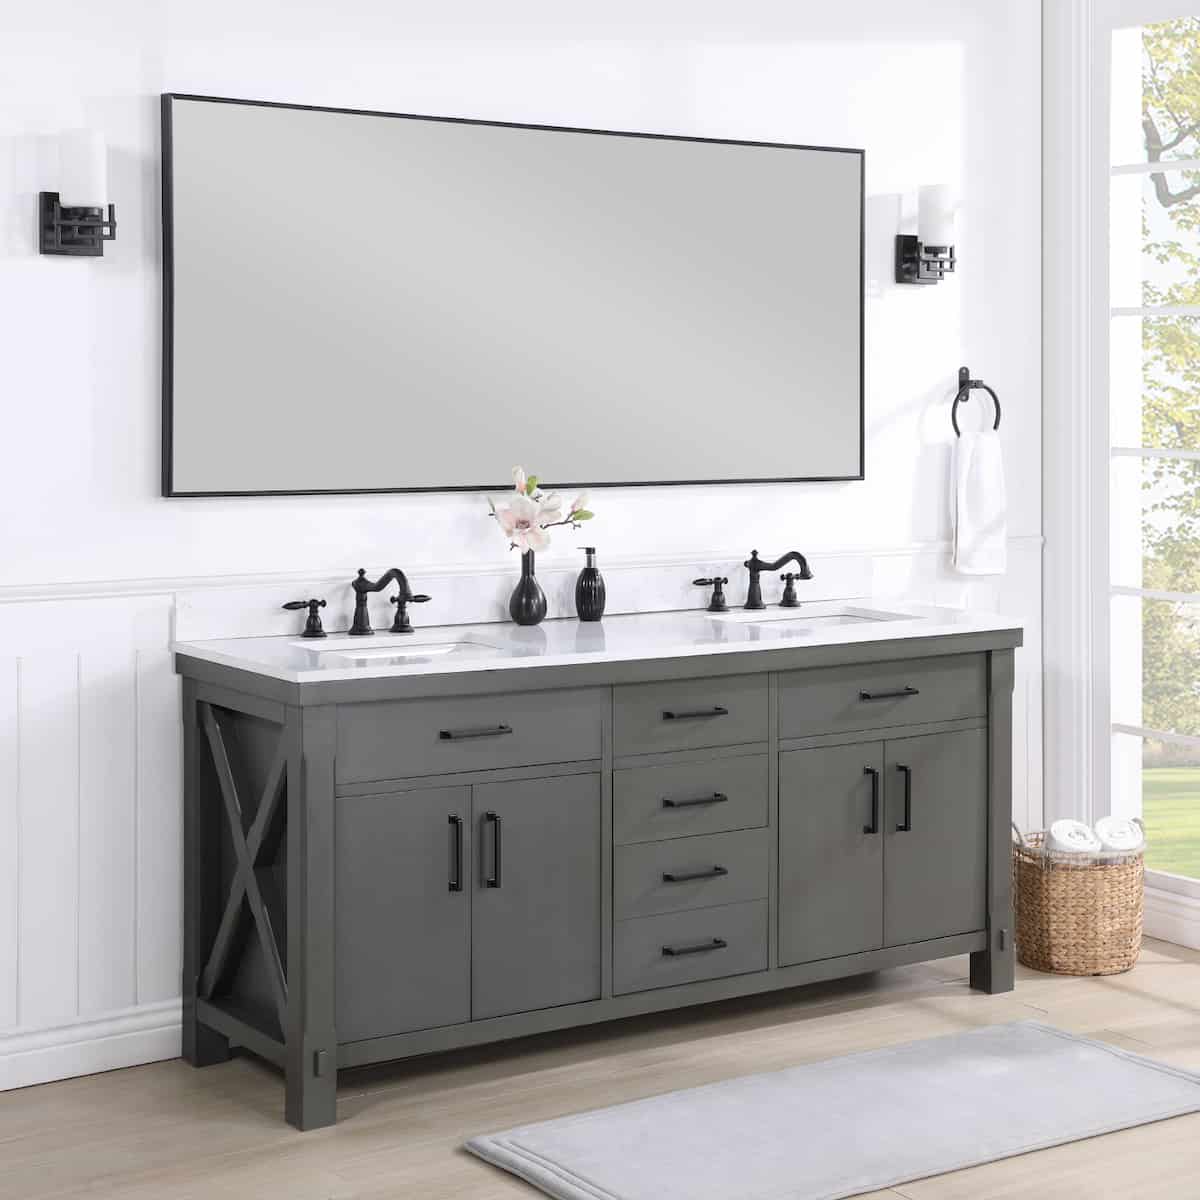 Vinnova Viella 72 Inch Freestanding Double Sink Bath Vanity in Rust Grey Finish with White Composite Countertop With Mirror Side 701872-RU-WS